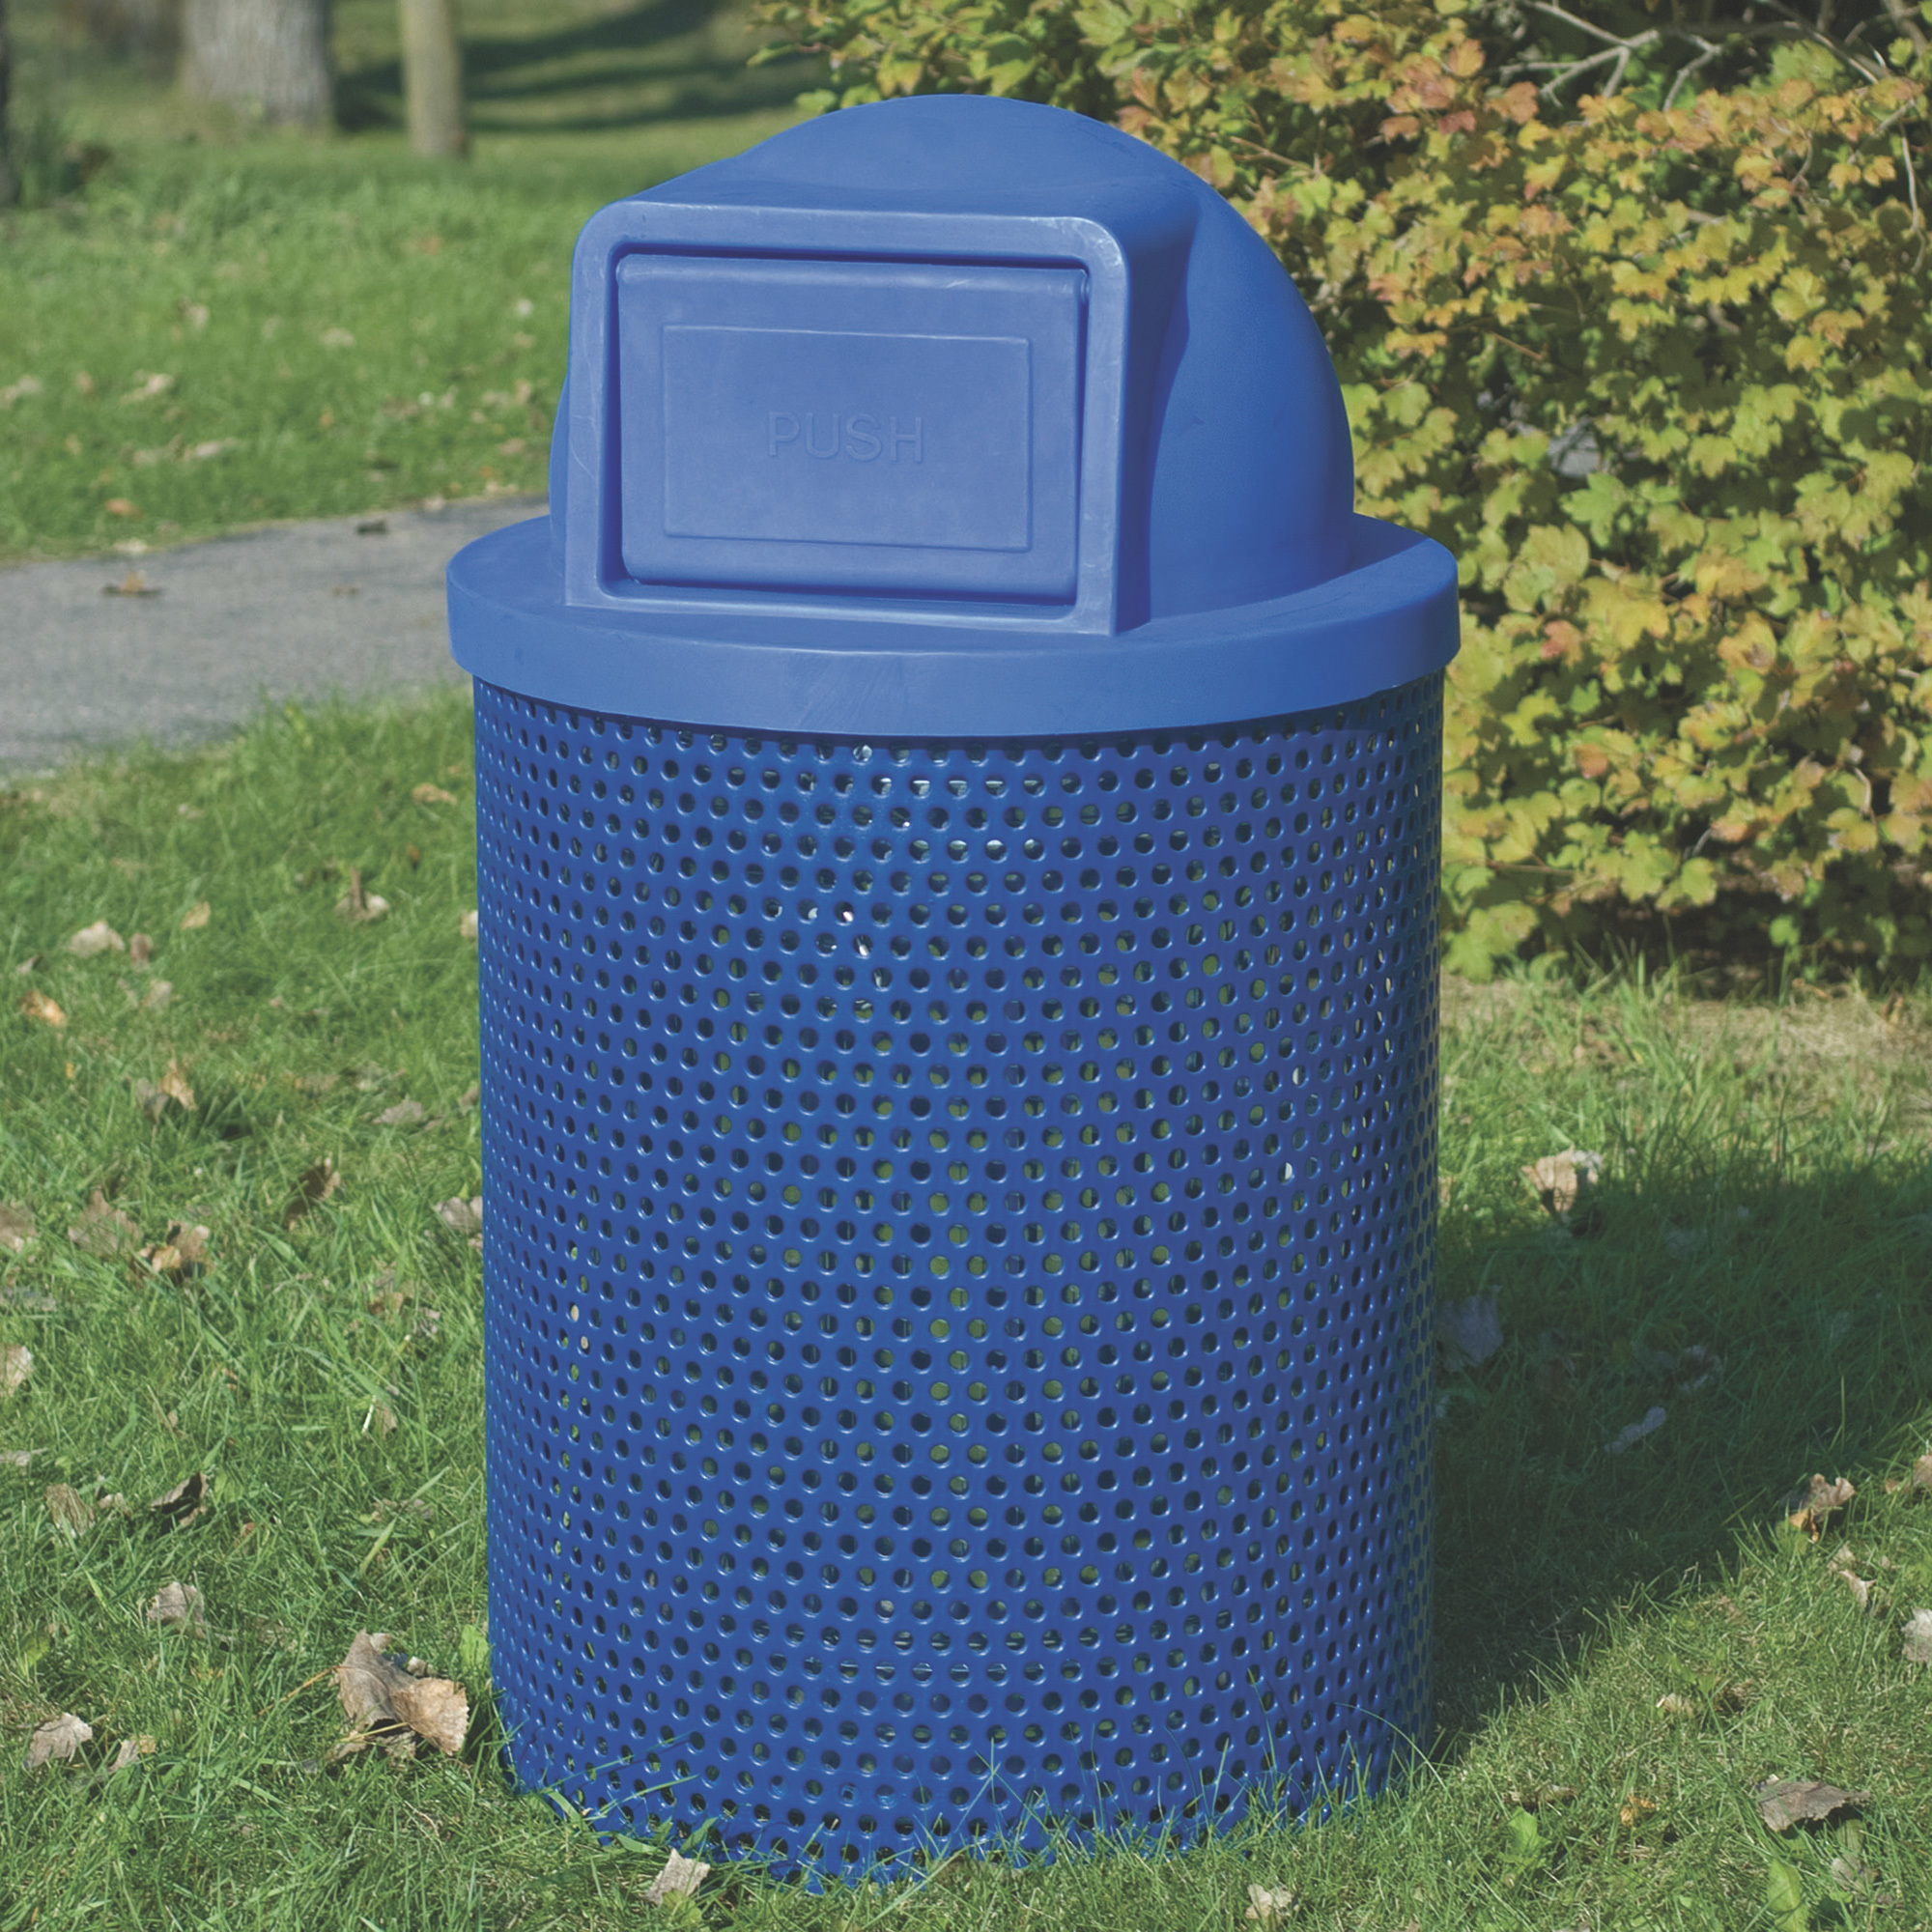 Pilot Rock Round Perforated Steel Trash Receptacle with Plastic Dome Lid â Blue, 28Inch Diameter x 42Inch H, Model CN-R/RU-32